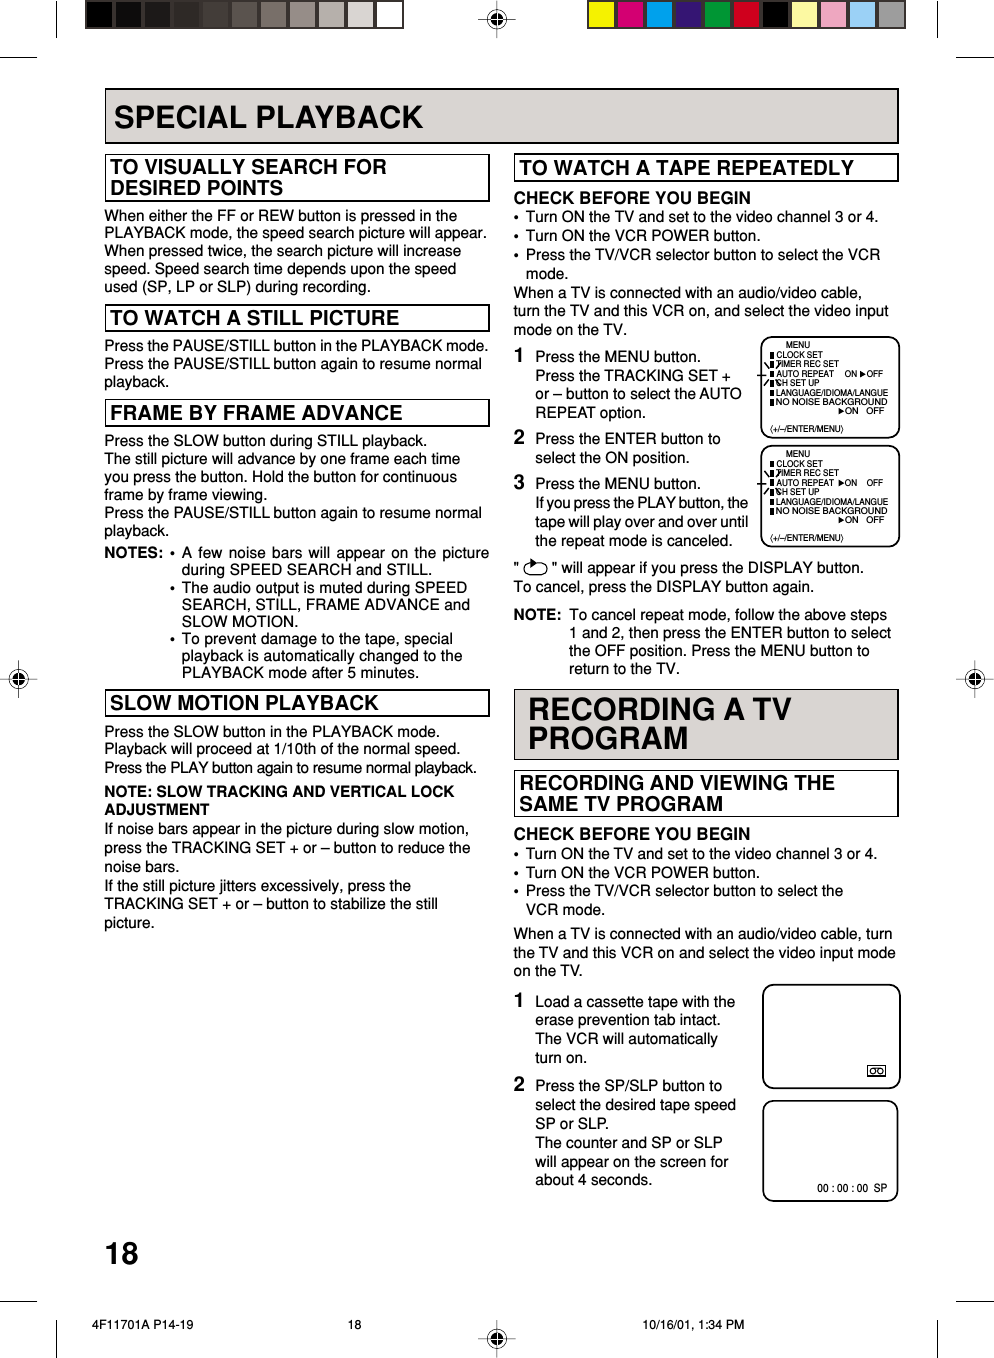 18 RECORDING AND VIEWING THE SAME TV PROGRAMCHECK BEFORE YOU BEGIN•Turn ON the TV and set to the video channel 3 or 4.•Turn ON the VCR POWER button.•Press the TV/VCR selector button to select theVCR mode.When a TV is connected with an audio/video cable, turnthe TV and this VCR on and select the video input modeon the TV.1Load a cassette tape with theerase prevention tab intact.The VCR will automaticallyturn on.2Press the SP/SLP button toselect the desired tape speedSP or SLP.The counter and SP or SLPwill appear on the screen forabout 4 seconds. TO WATCH A TAPE REPEATEDLYNOTE: To cancel repeat mode, follow the above steps1 and 2, then press the ENTER button to selectthe OFF position. Press the MENU button toreturn to the TV.CHECK BEFORE YOU BEGIN•Turn ON the TV and set to the video channel 3 or 4.•Turn ON the VCR POWER button.•Press the TV/VCR selector button to select the VCRmode.When a TV is connected with an audio/video cable,turn the TV and this VCR on, and select the video inputmode on the TV. SLOW MOTION PLAYBACKPress the SLOW button in the PLAYBACK mode.Playback will proceed at 1/10th of the normal speed.Press the PLAY button again to resume normal playback.NOTE: SLOW TRACKING AND VERTICAL LOCKADJUSTMENTIf noise bars appear in the picture during slow motion,press the TRACKING SET + or – button to reduce thenoise bars.If the still picture jitters excessively, press theTRACKING SET + or – button to stabilize the stillpicture.&quot;   &quot; will appear if you press the DISPLAY button.To cancel, press the DISPLAY button again.1Press the MENU button.Press the TRACKING SET +or – button to select the AUTOREPEAT option.2Press the ENTER button toselect the ON position.3Press the MENU button.If you press the PLAY button, thetape will play over and over untilthe repeat mode is canceled.⟨+/–/ENTER/MENU⟩MENUCLOCK SETTIMER REC SET ON OFFAUTO REPEATCH SET UPLANGUAGE/IDIOMA/LANGUE ON OFFNO NOISE BACKGROUND⟨+/–/ENTER/MENU⟩MENUCLOCK SETTIMER REC SET ON OFFAUTO REPEATCH SET UPLANGUAGE/IDIOMA/LANGUE ON OFFNO NOISE BACKGROUNDSPECIAL PLAYBACK TO VISUALLY SEARCH FOR DESIRED POINTSWhen either the FF or REW button is pressed in thePLAYBACK mode, the speed search picture will appear.When pressed twice, the search picture will increasespeed. Speed search time depends upon the speedused (SP, LP or SLP) during recording. FRAME BY FRAME ADVANCEPress the PAUSE/STILL button in the PLAYBACK mode.Press the PAUSE/STILL button again to resume normalplayback.Press the SLOW button during STILL playback.The still picture will advance by one frame each timeyou press the button. Hold the button for continuousframe by frame viewing.Press the PAUSE/STILL button again to resume normalplayback.NOTES: •A few noise bars will appear on the pictureduring SPEED SEARCH and STILL.•The audio output is muted during SPEEDSEARCH, STILL, FRAME ADVANCE andSLOW MOTION.•To prevent damage to the tape, specialplayback is automatically changed to thePLAYBACK mode after 5 minutes.RECORDING A TVPROGRAM00 : 00 : 00  SP TO WATCH A STILL PICTURE  4F11701A P14-19 10/16/01, 1:34 PM18